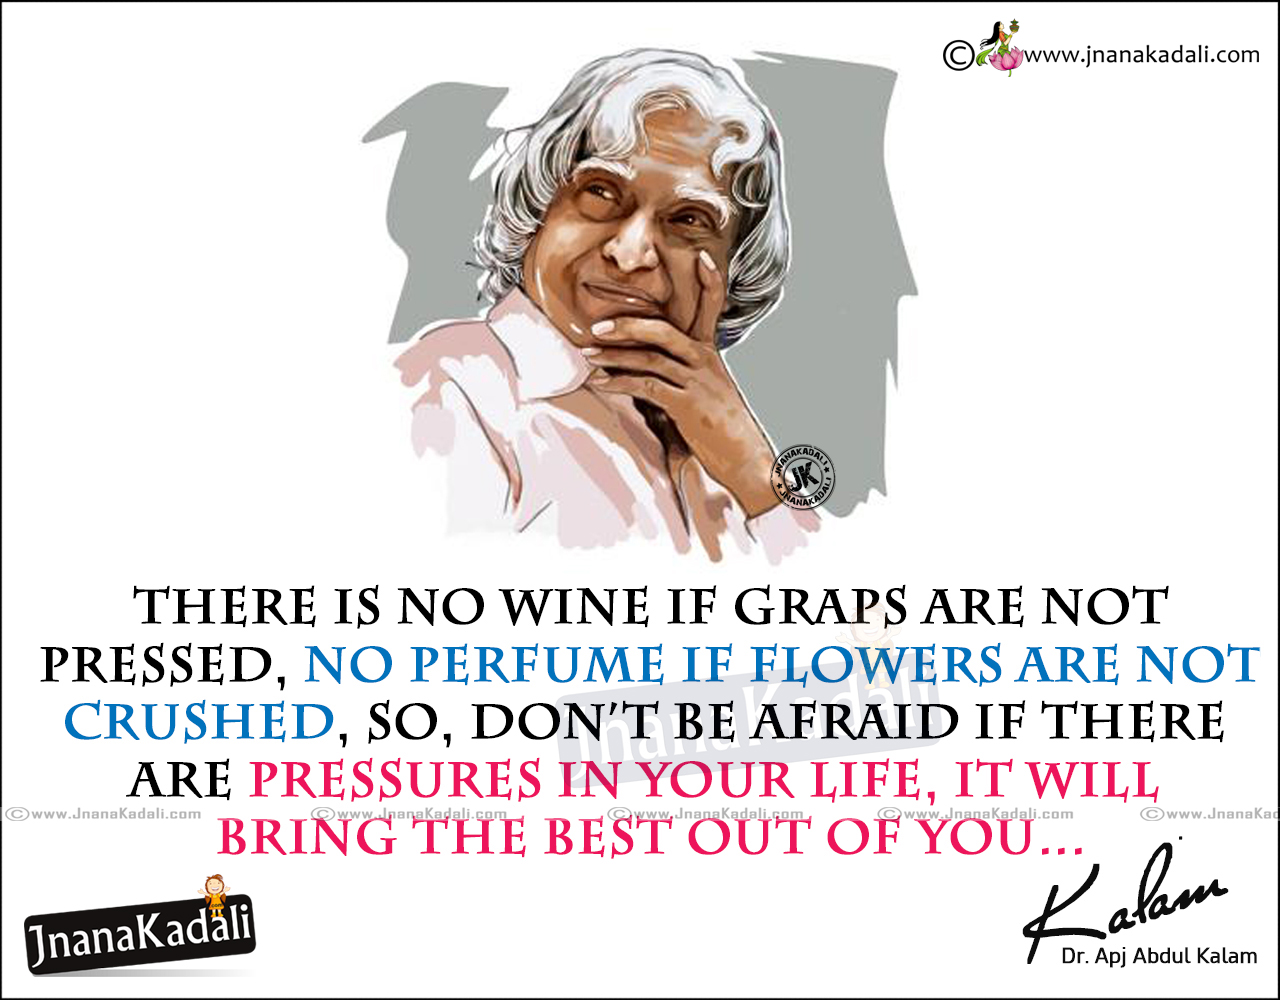 Famous Best Abdul Kalam Motivational Speeches with hd wallpapers in English | JNANA KADALI.COM ...